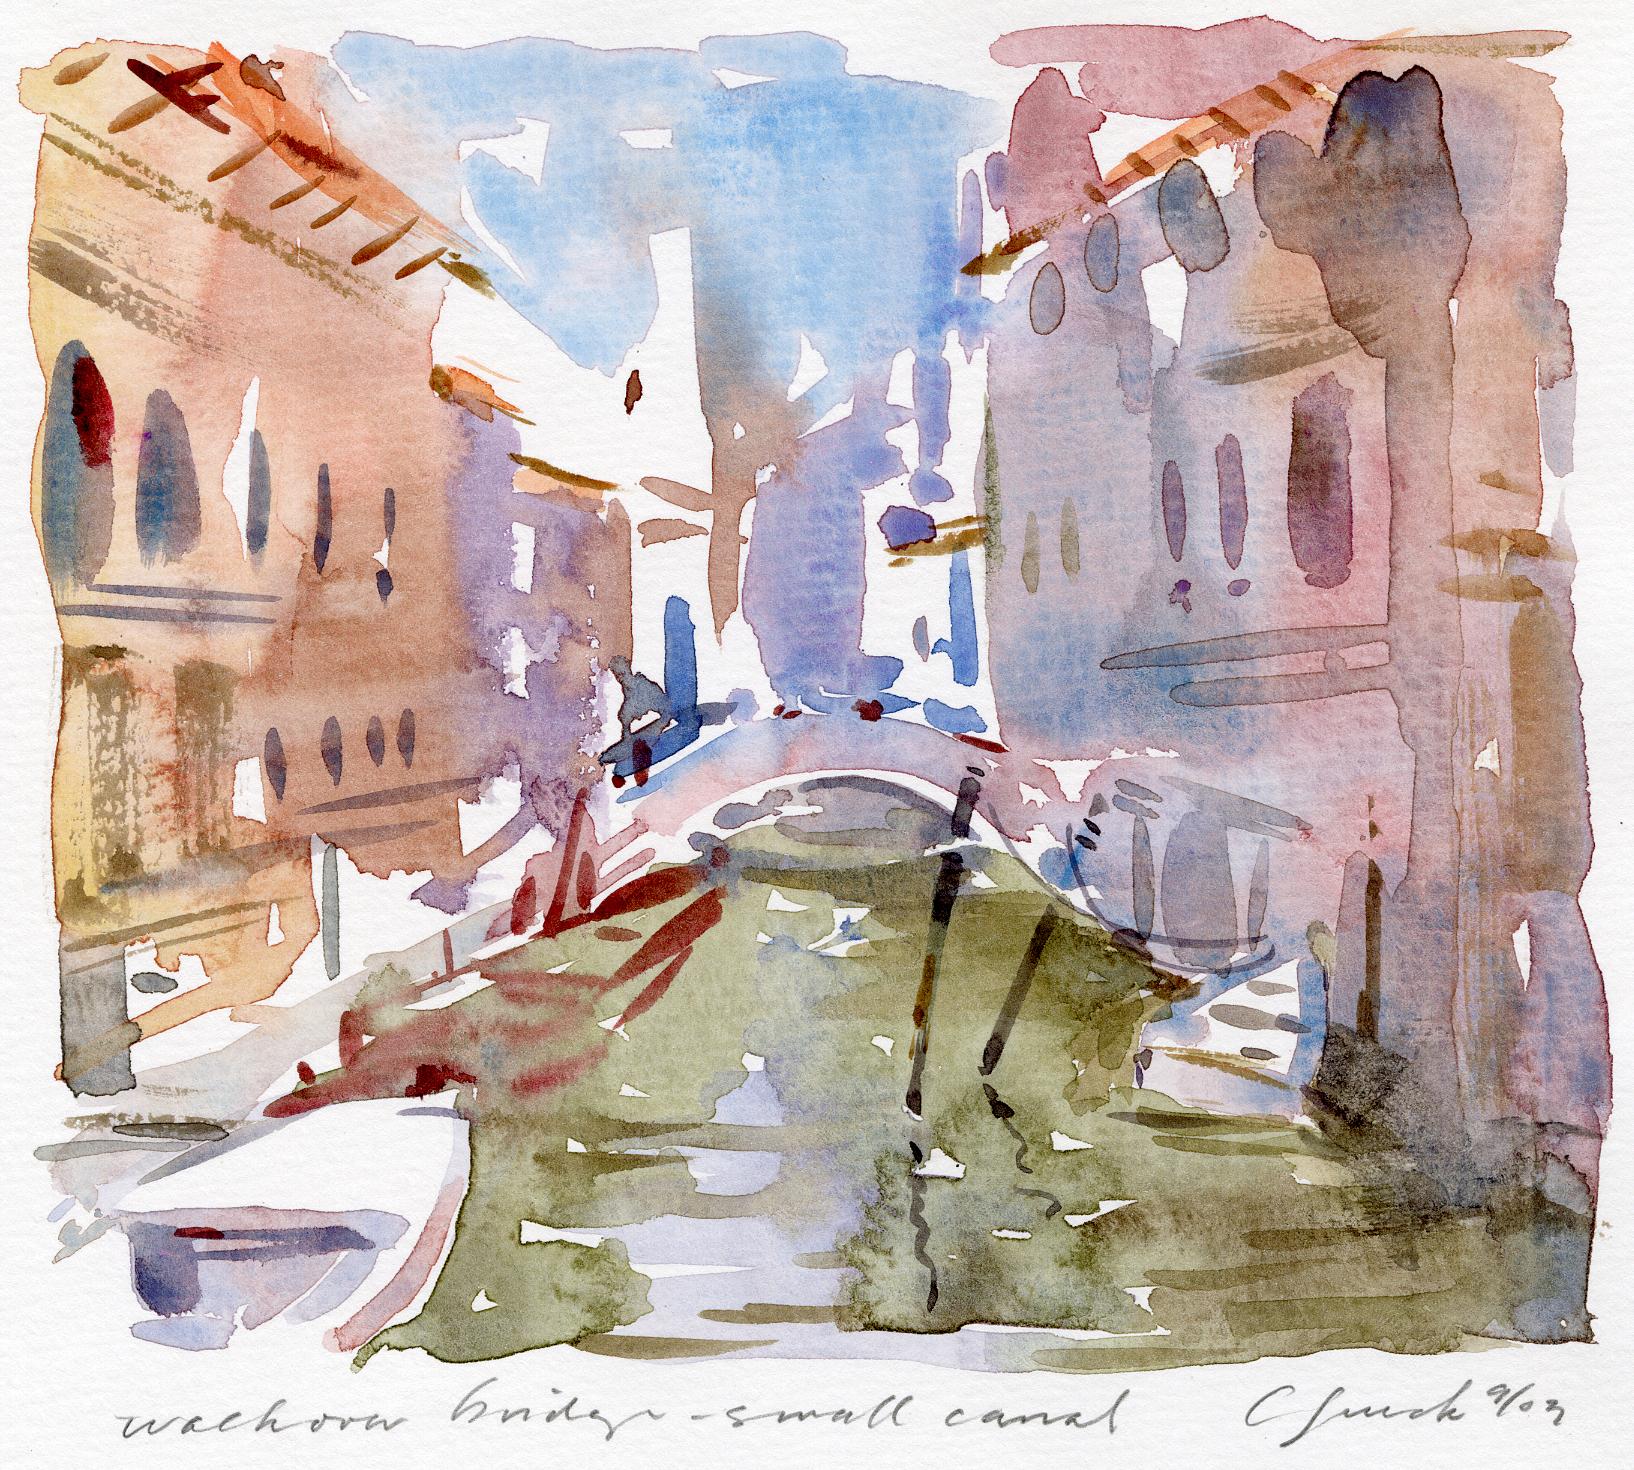 'Walkover Bridge - Small Canal' is an original watercolor by Craig Lueck. These petite watercolors that make up Lueck's portfolio serve as windows into the artist's world. Scenery from his travels to Colorado and Italy are beautifully recreated in